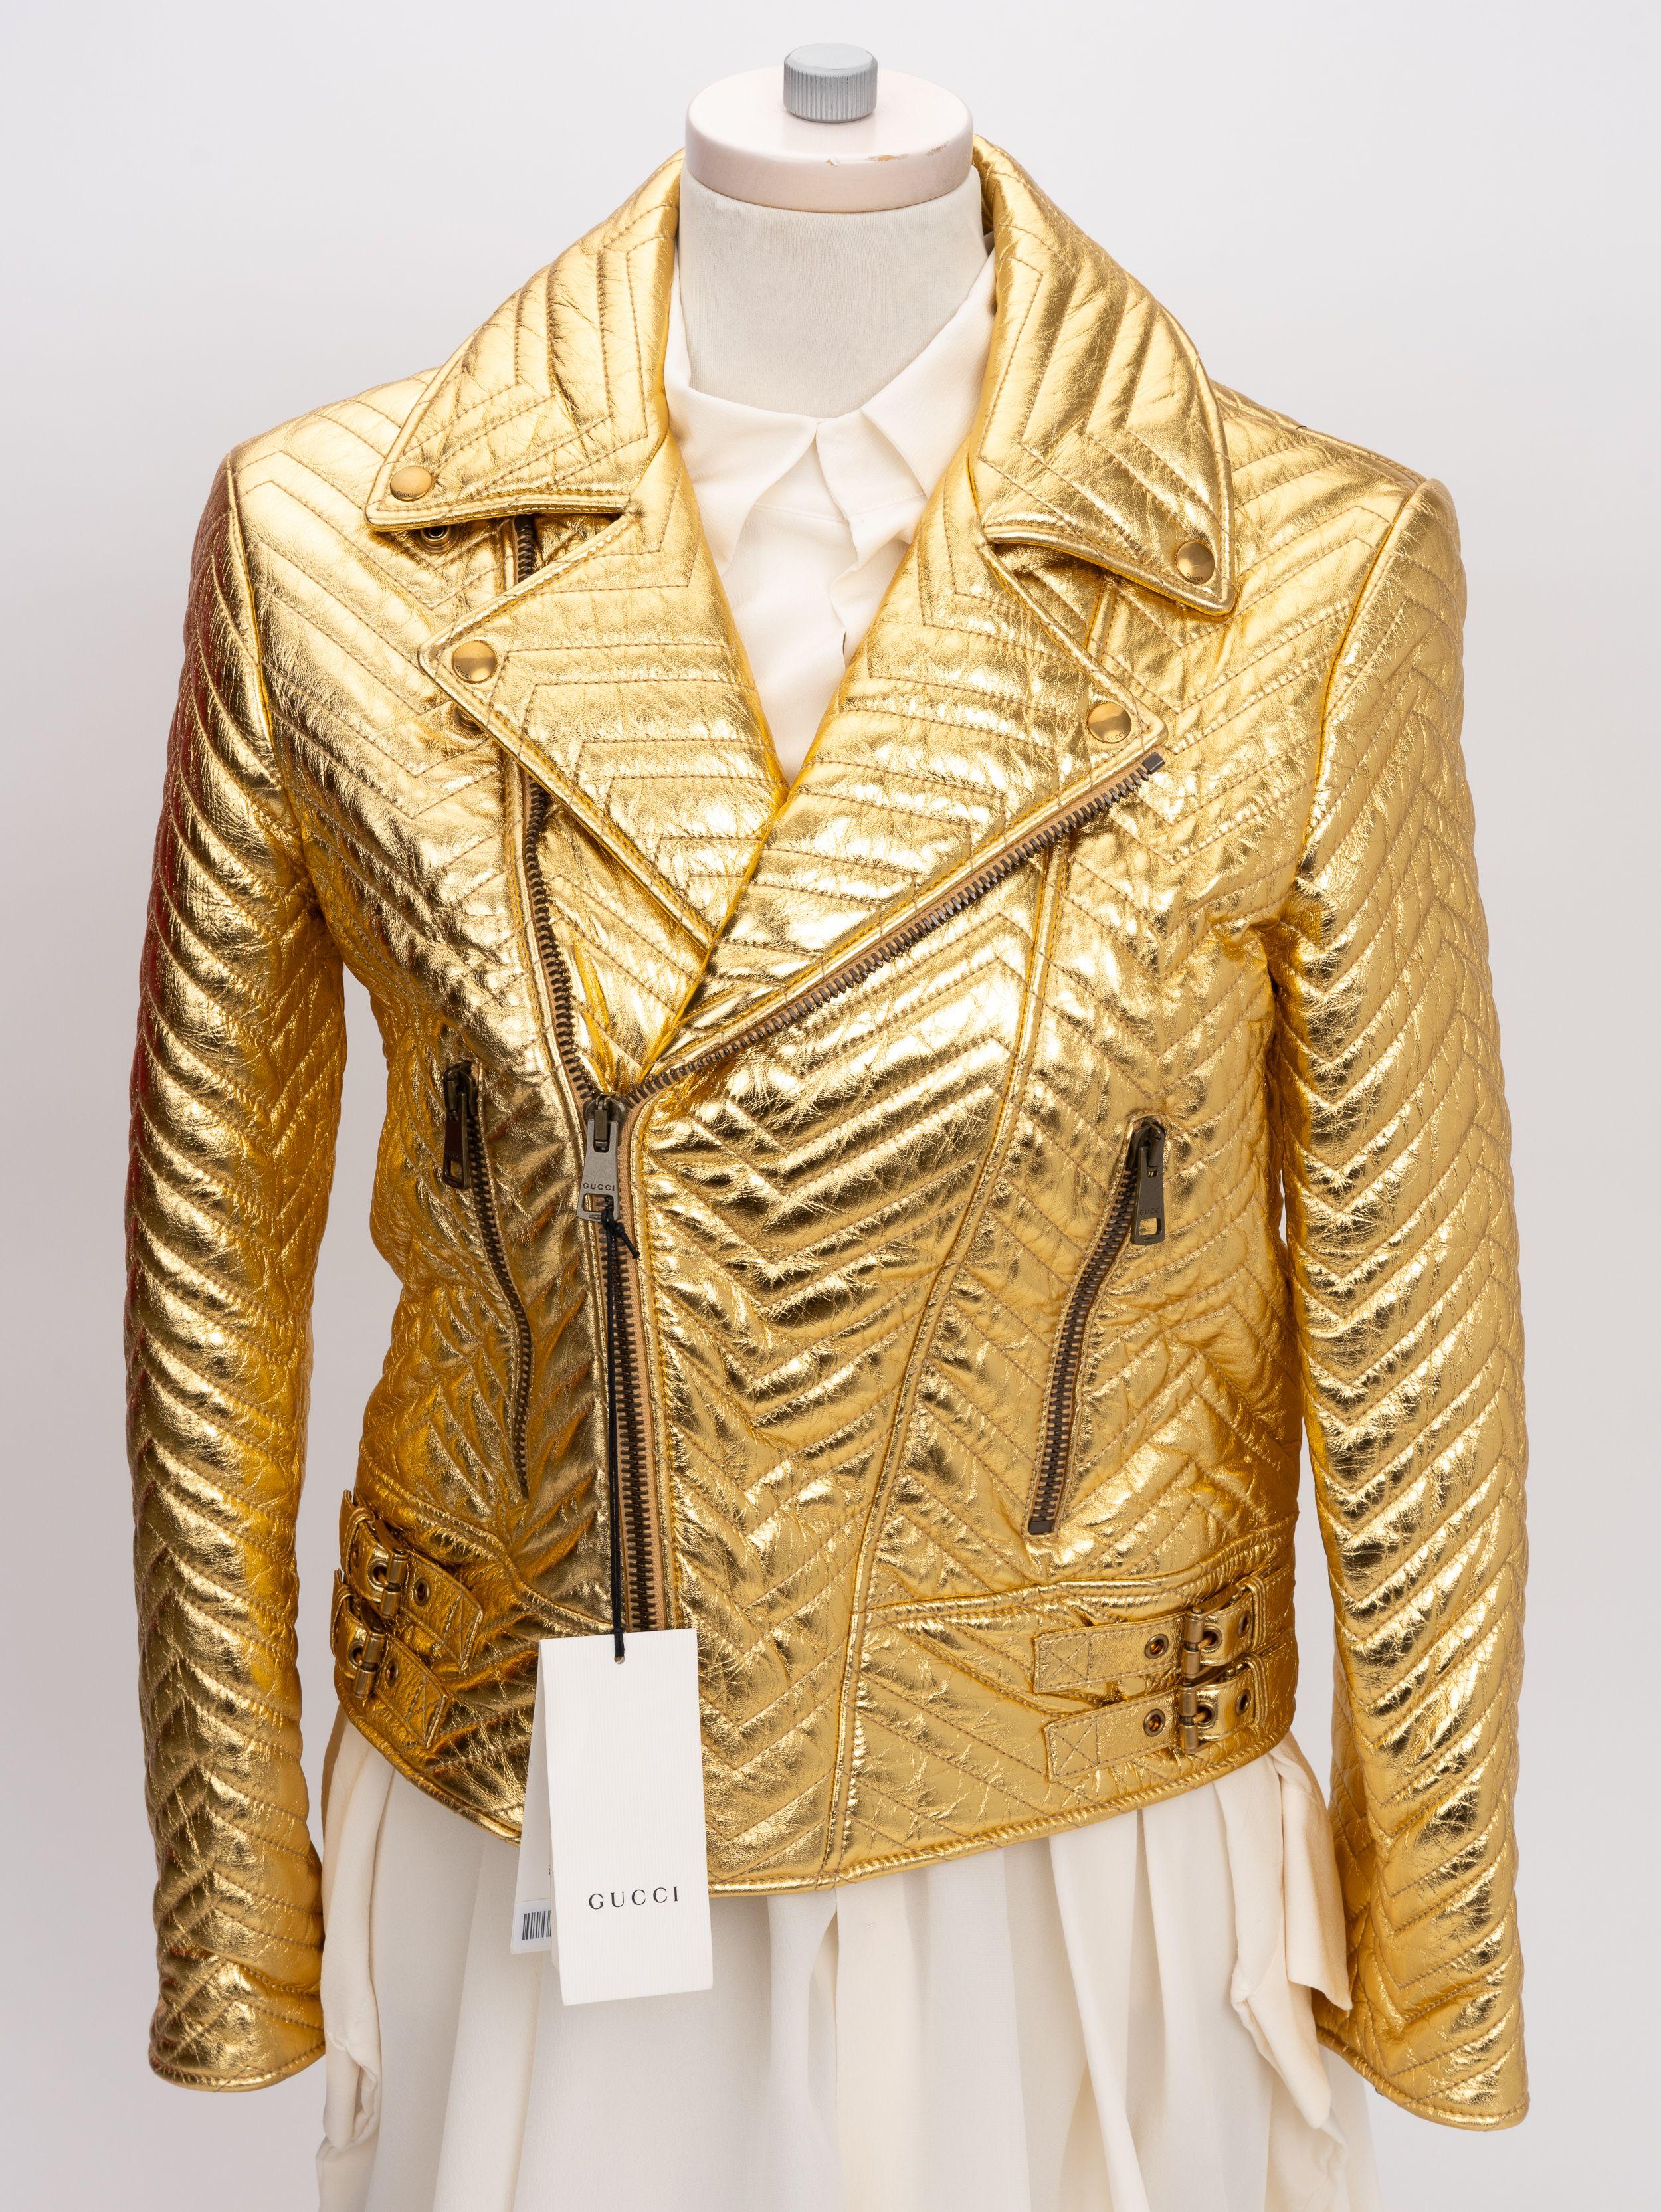 Gucci biker jacket made from soft leather and gold metallic color. Zipper front with two zipper pockets. Signature Marmont heart in the back. 
Size italian 40, small. 
Measurements: Shoulders 17.5